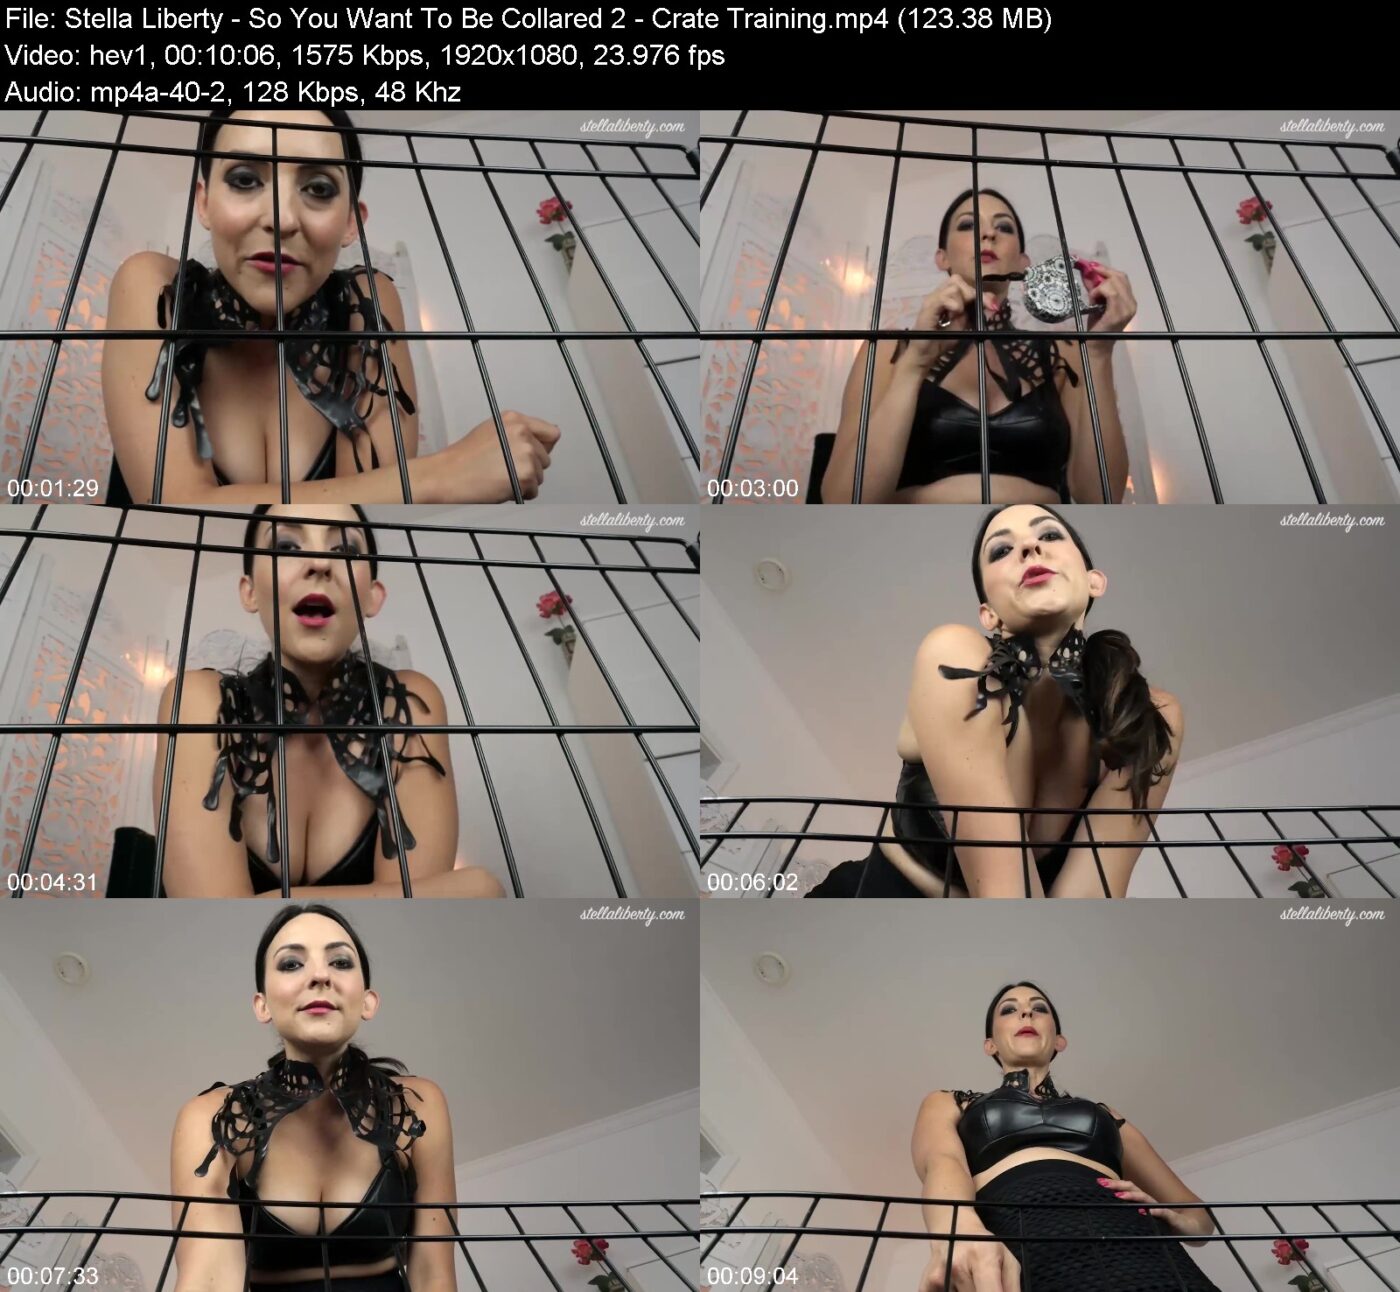 Actress: Stella Liberty. Title and Studio: So You Want To Be Collared 2 – Crate Training